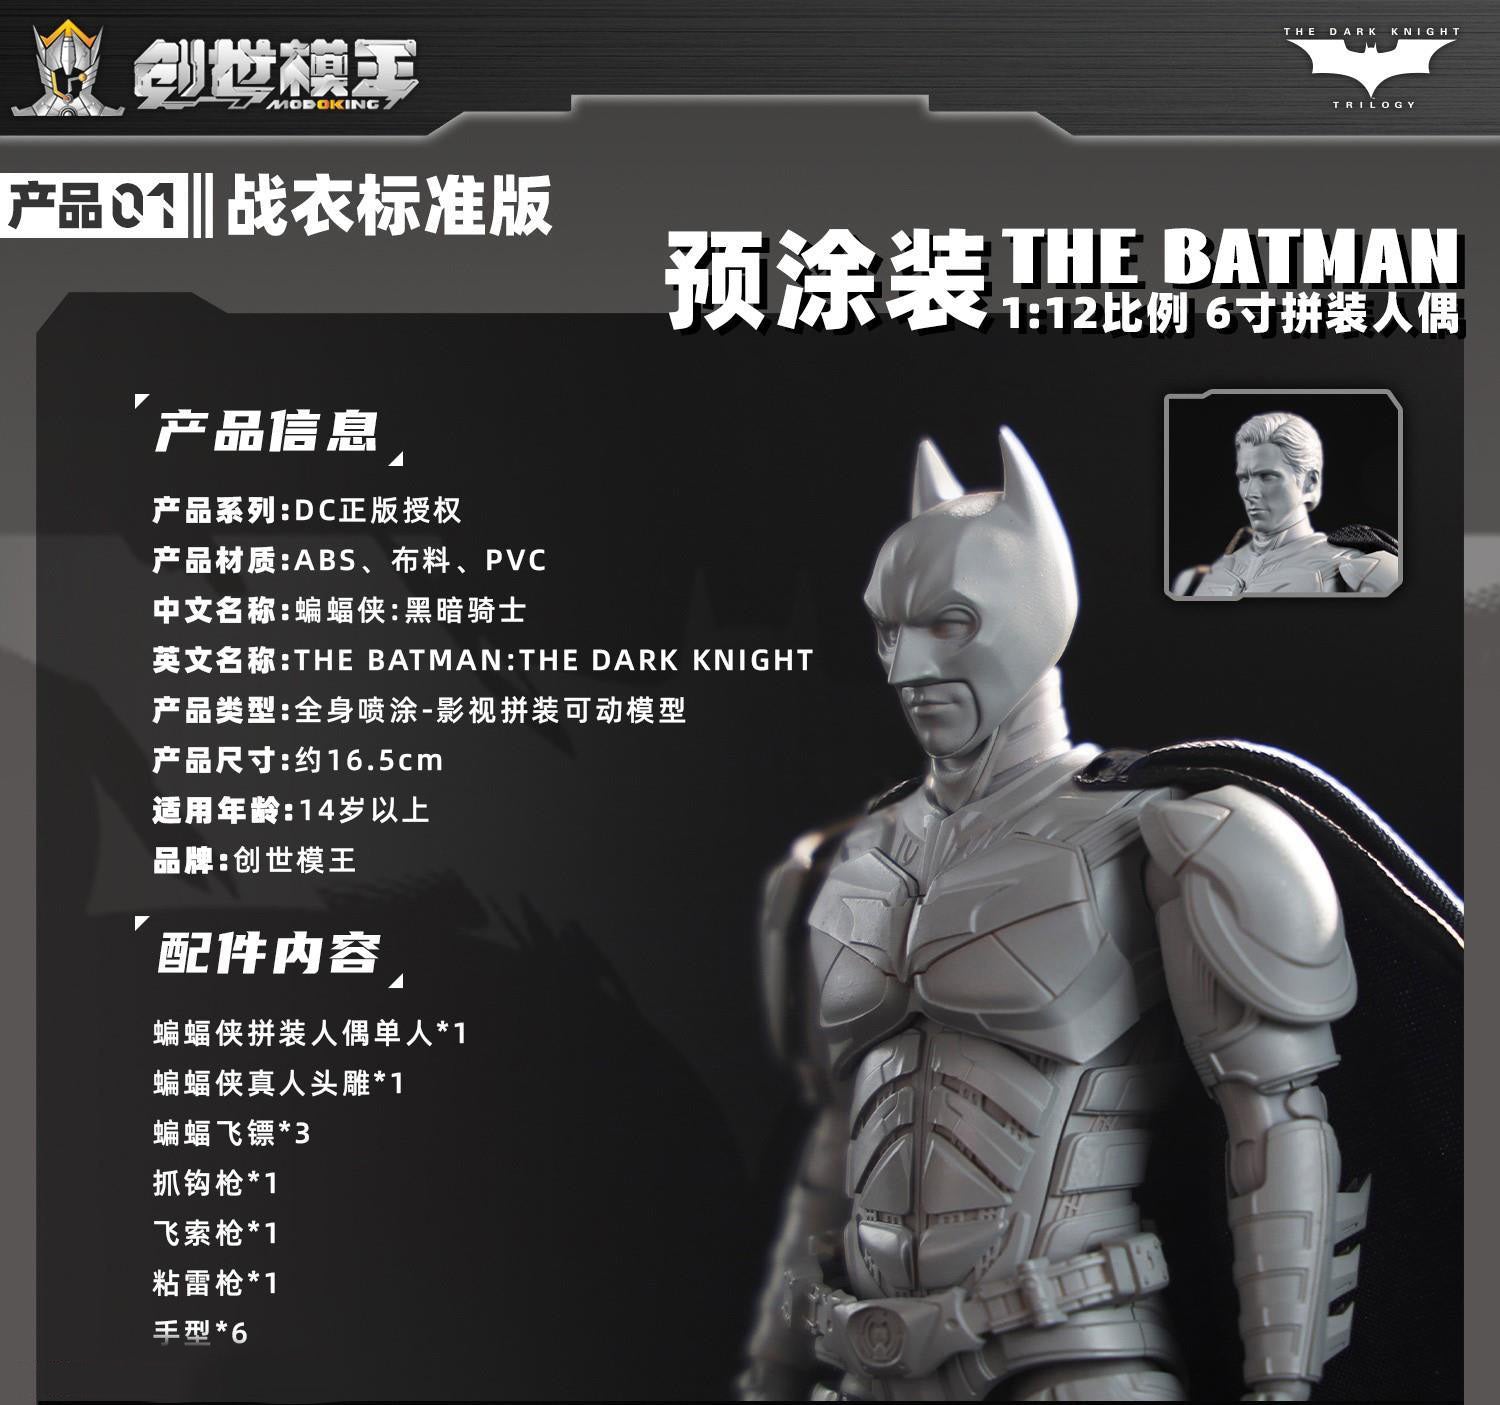 Modoking - The Dark Knight - Batman and Bat-Signal Deluxe Model Kit (1/12 Scale) - Marvelous Toys